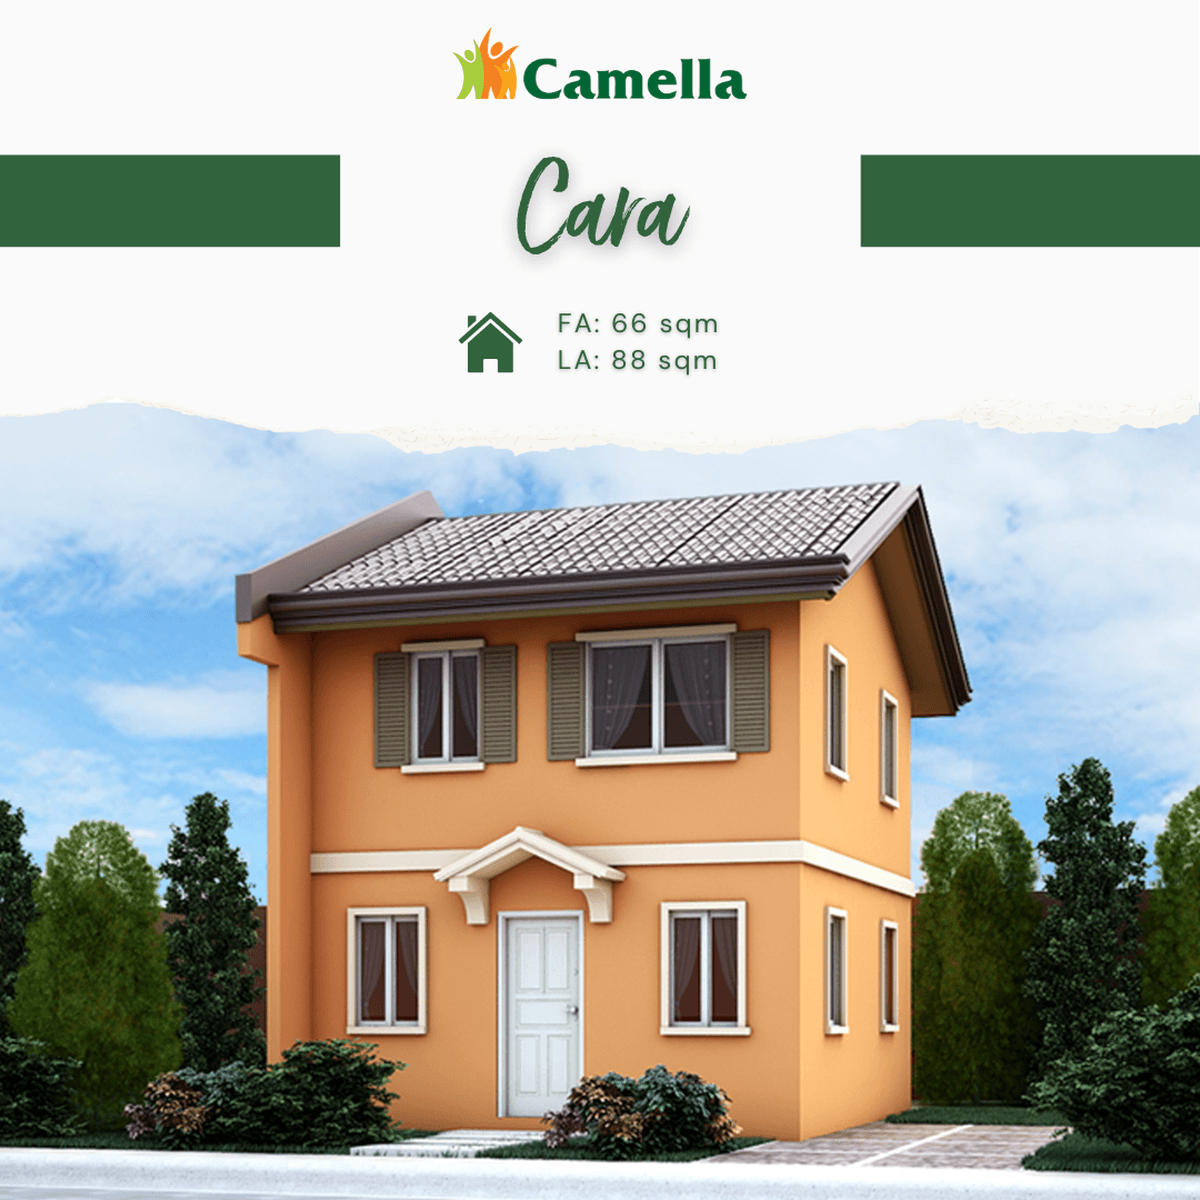 3BR HOUSE AND LOT FOR SALE IN CAMELLA LEGAZPI - CARA UNIT